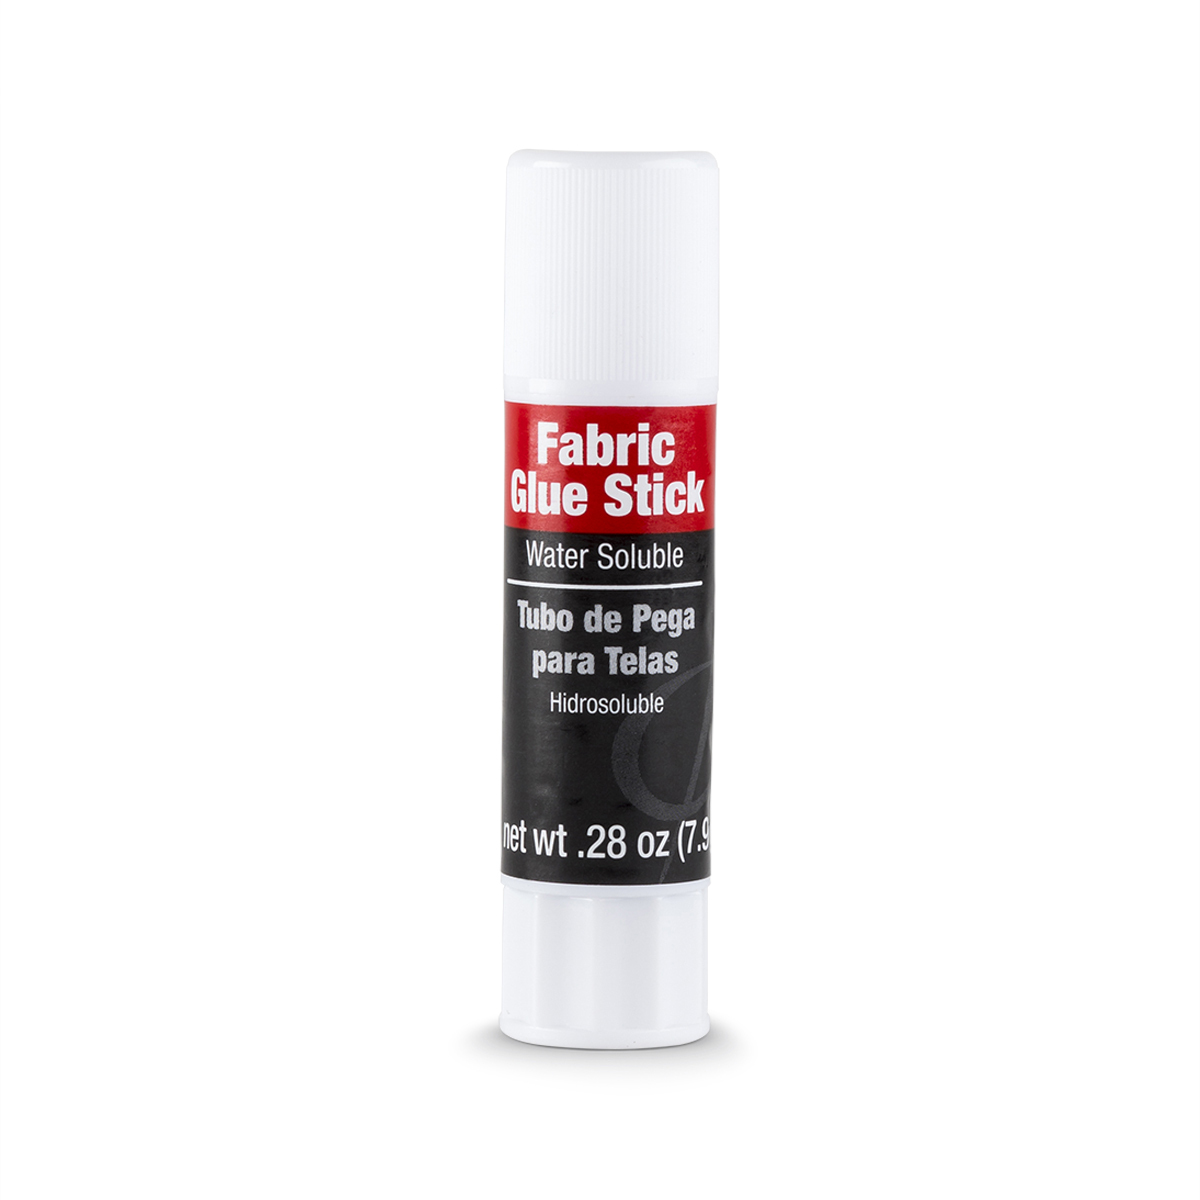 Collins fabric glue stick Basting adhesive, water soluble, acid